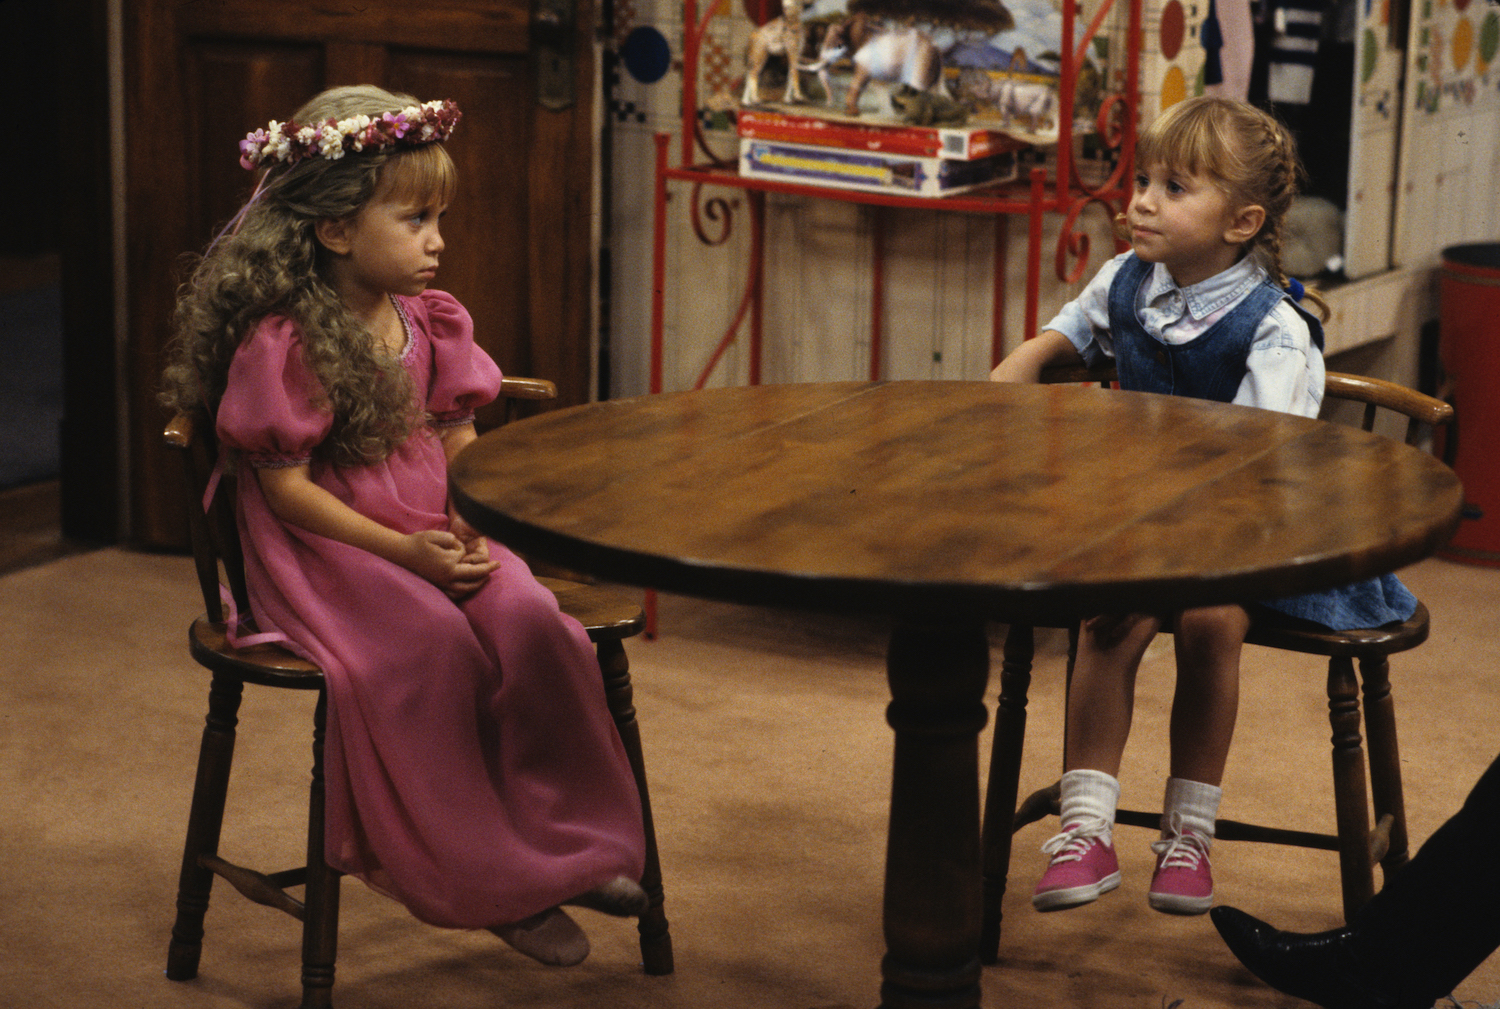 'Full House' Episode Titled 'The Devil Made Me Do It'